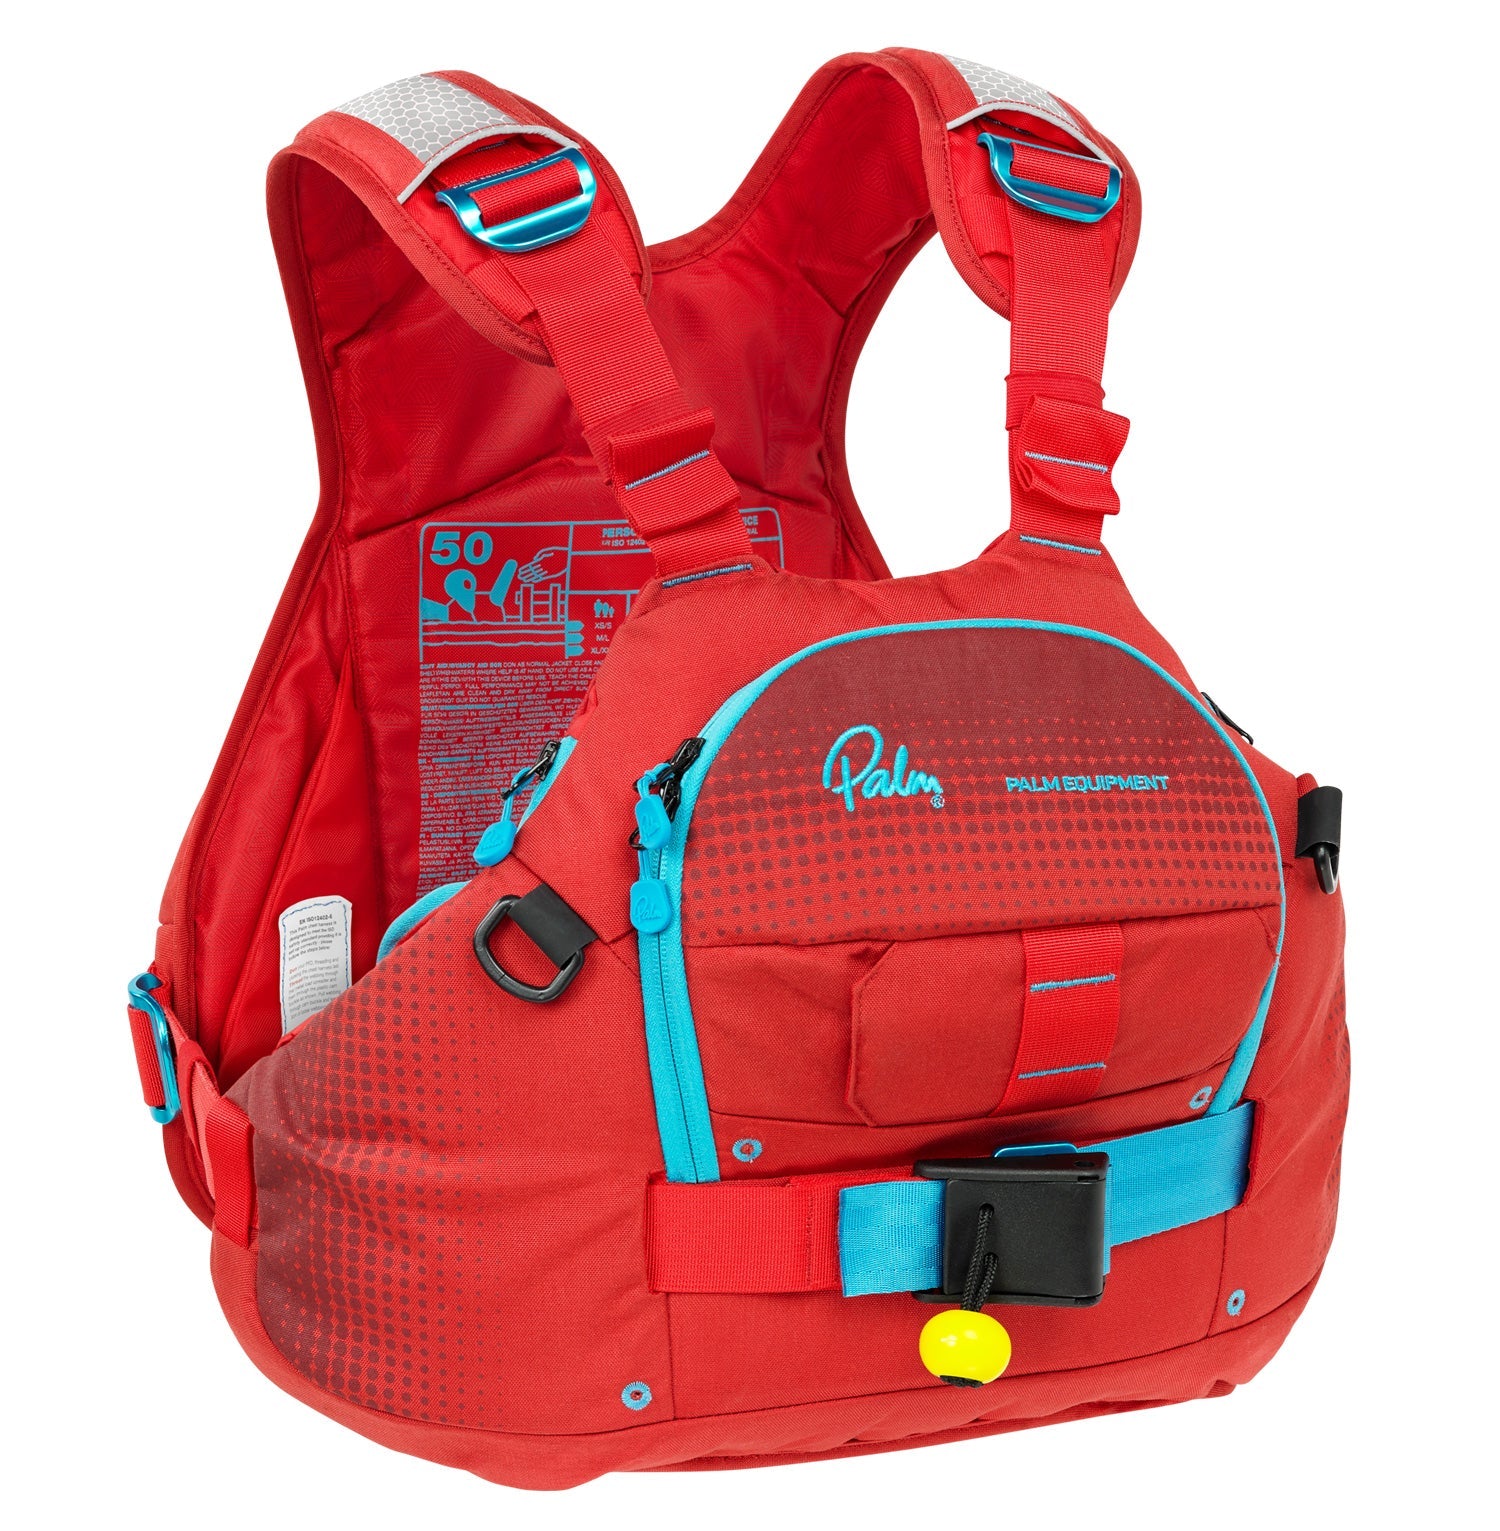 The Palm Nevis Buoyancy aid shown in Chilli/Red